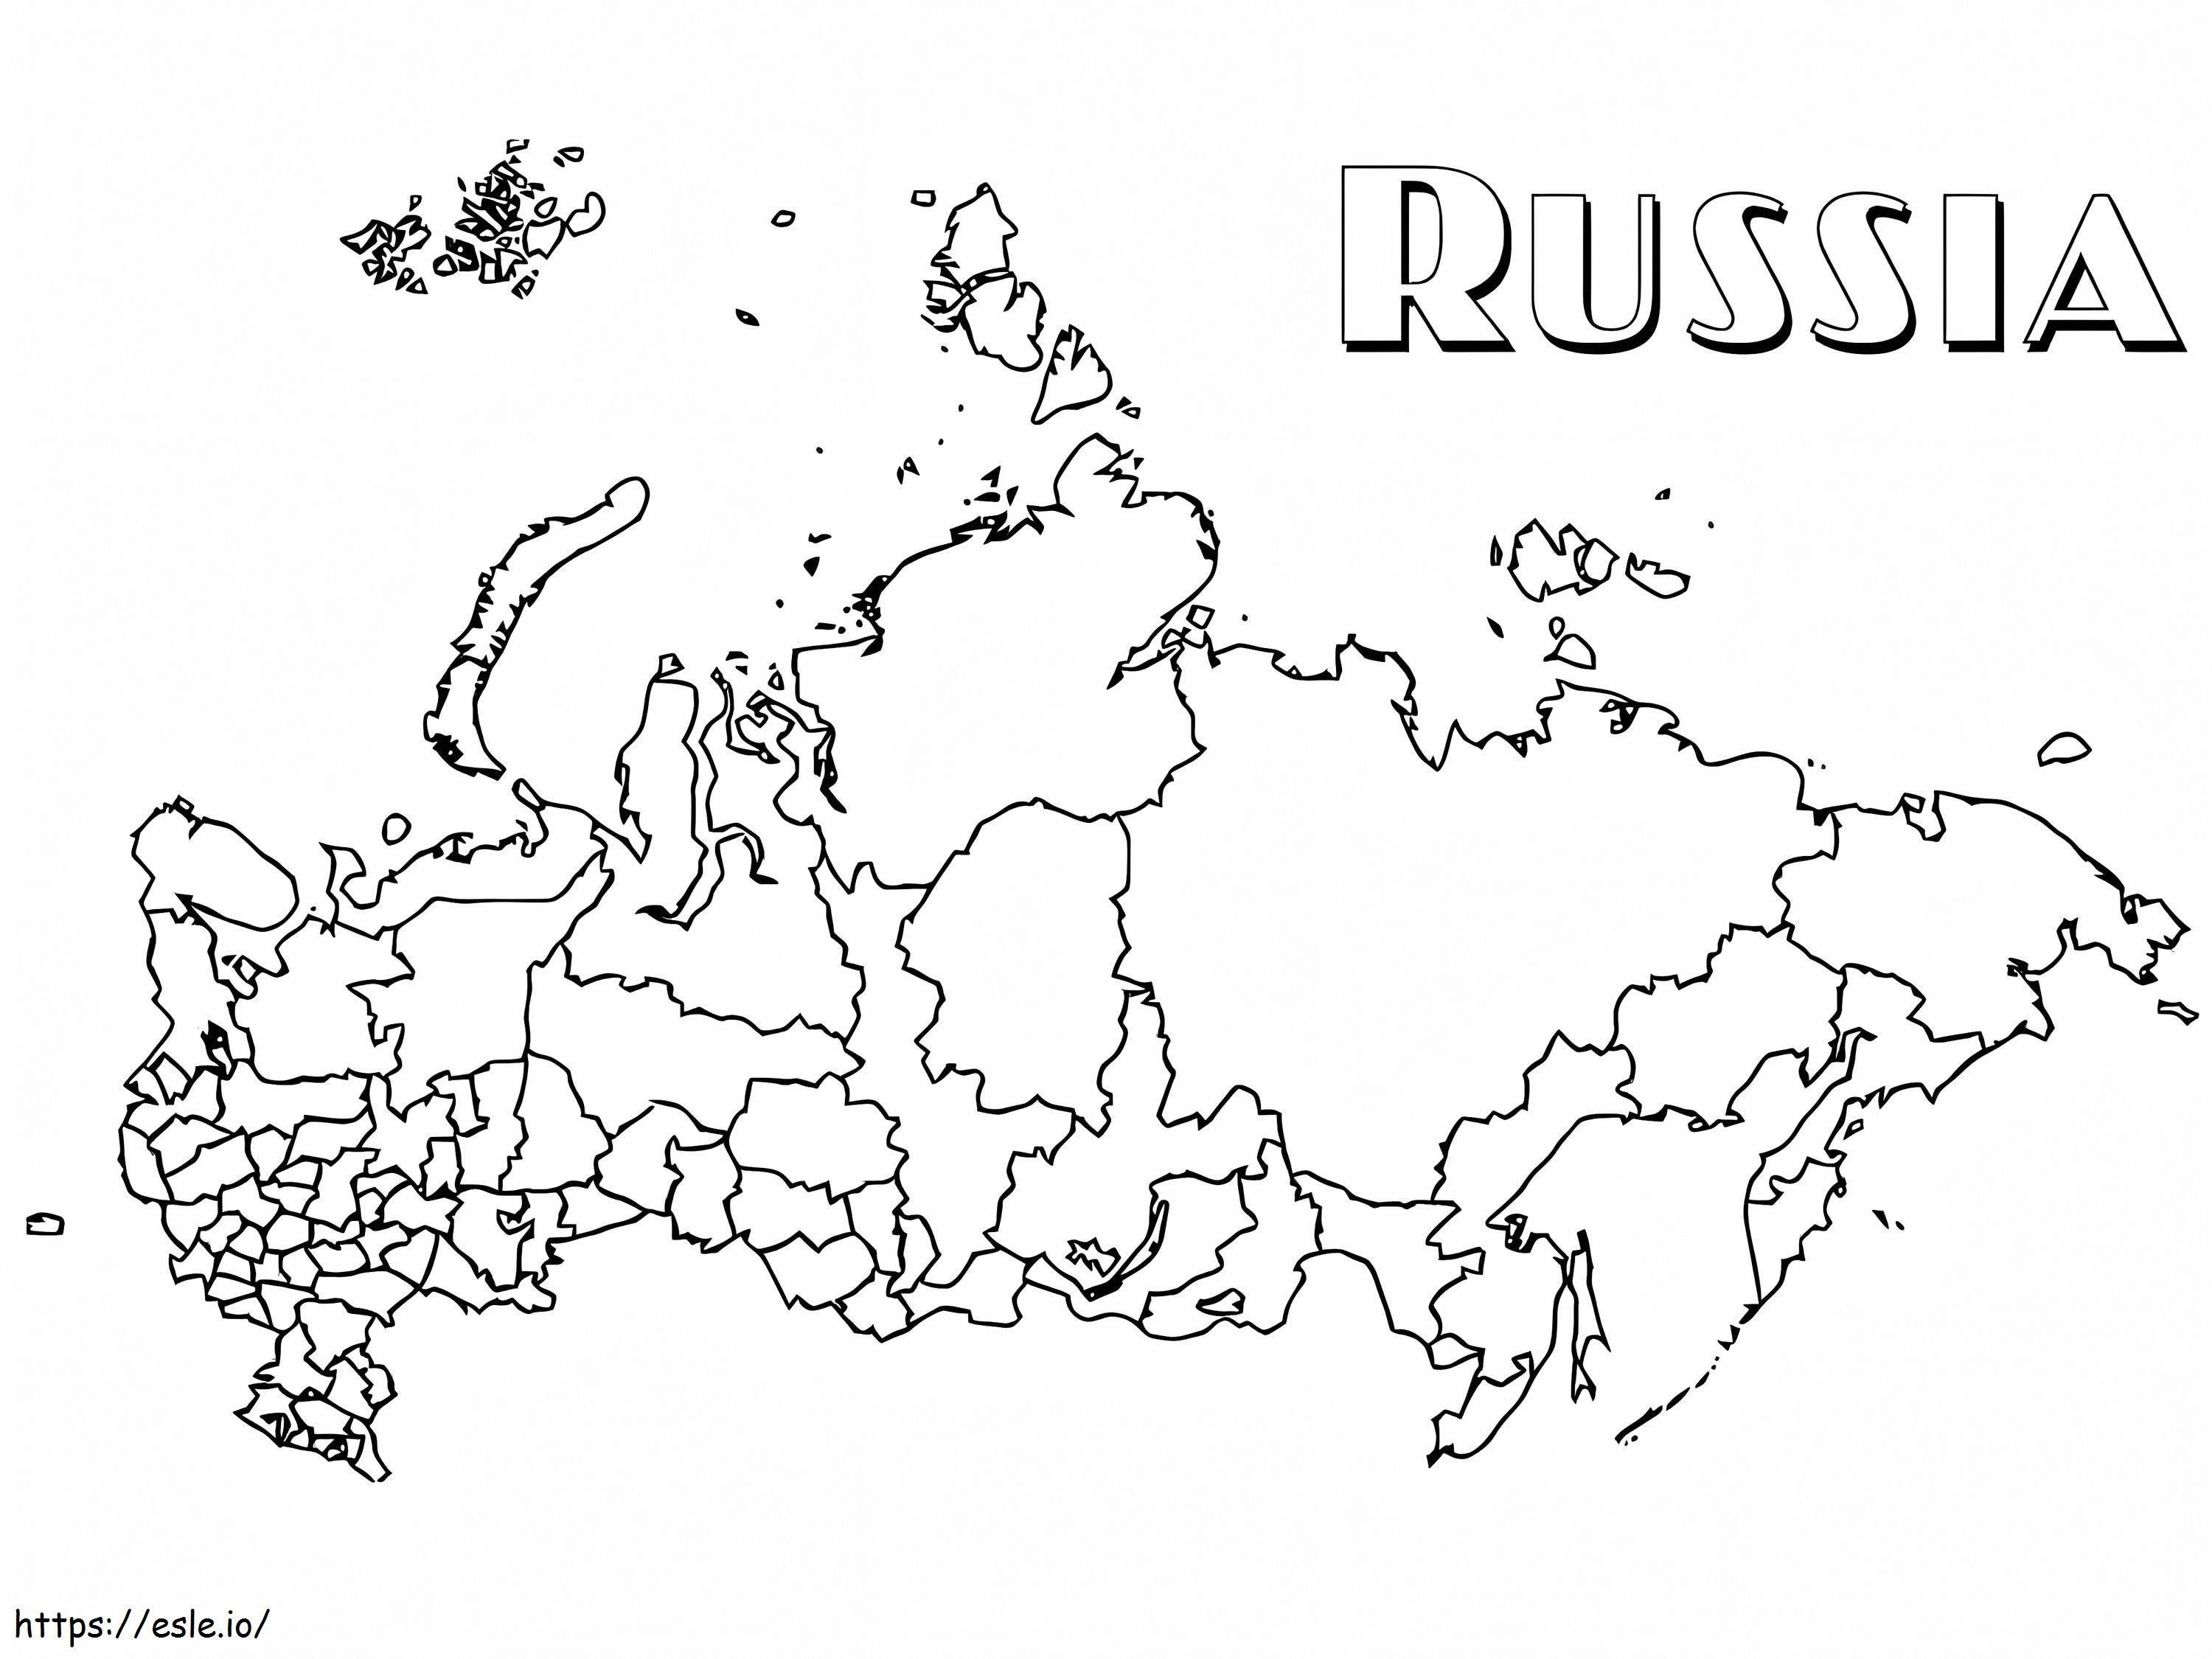 Russia Map coloring page